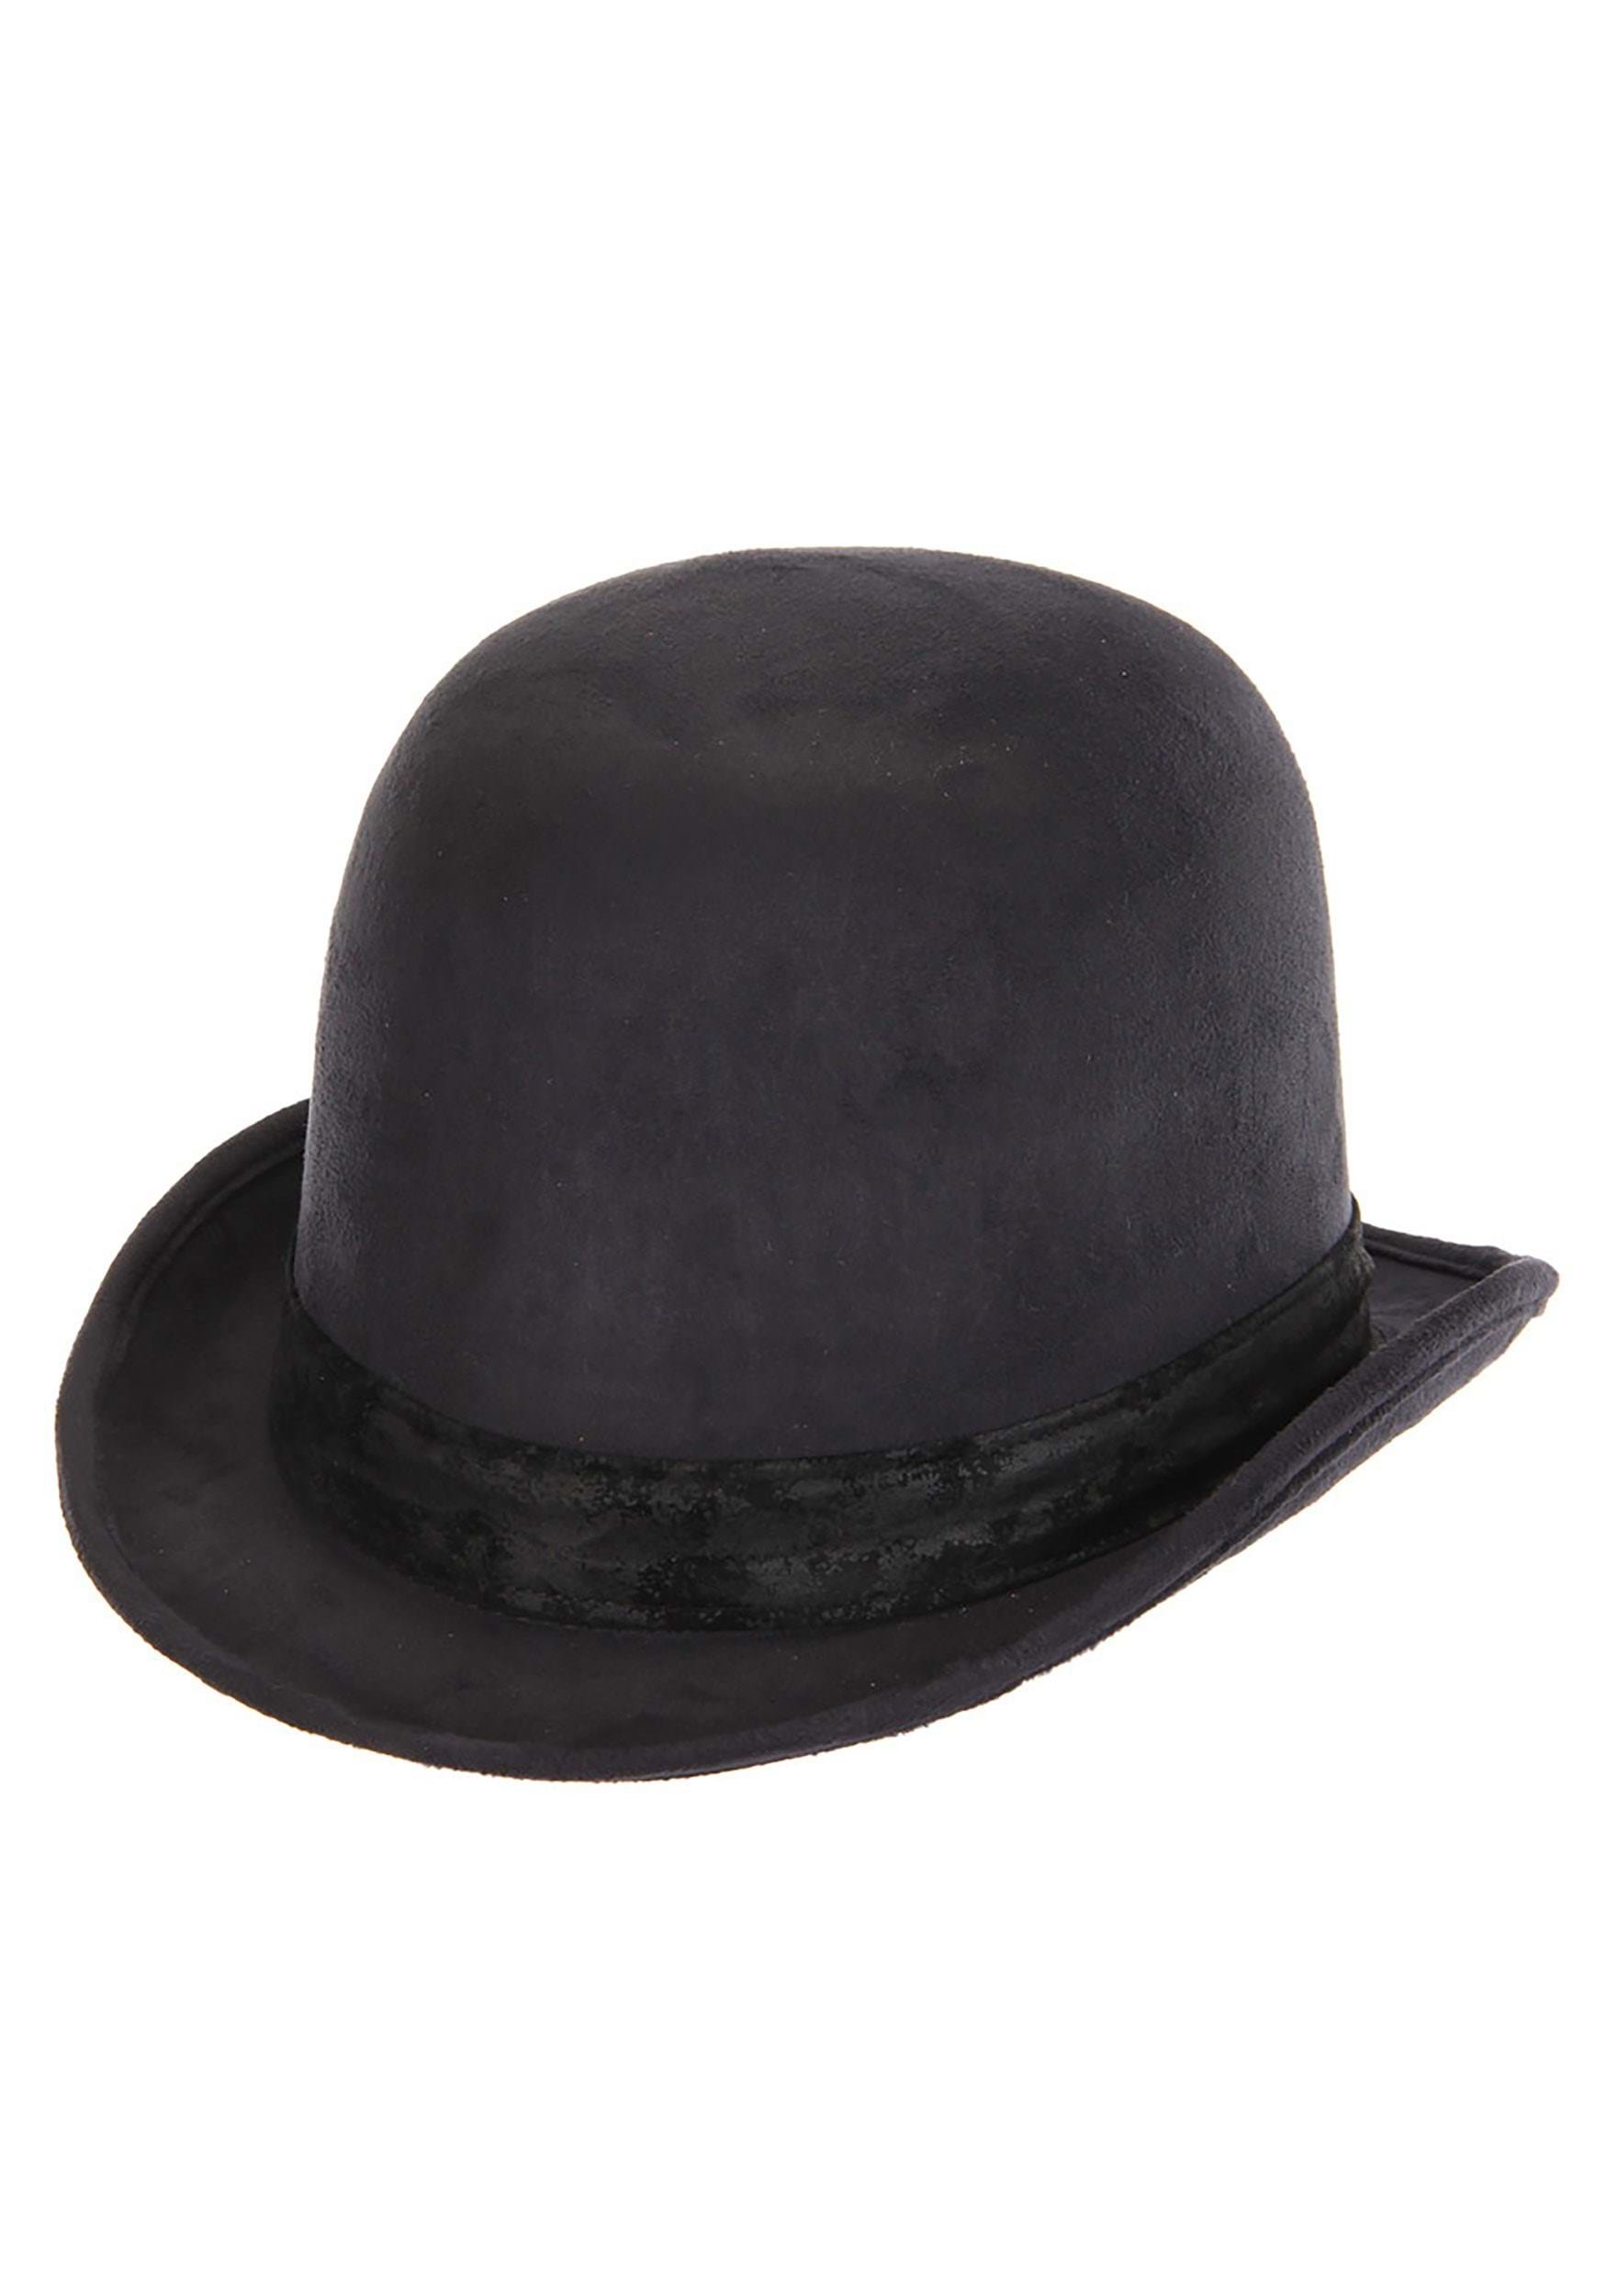 Black Derby Costume Hat Accessory